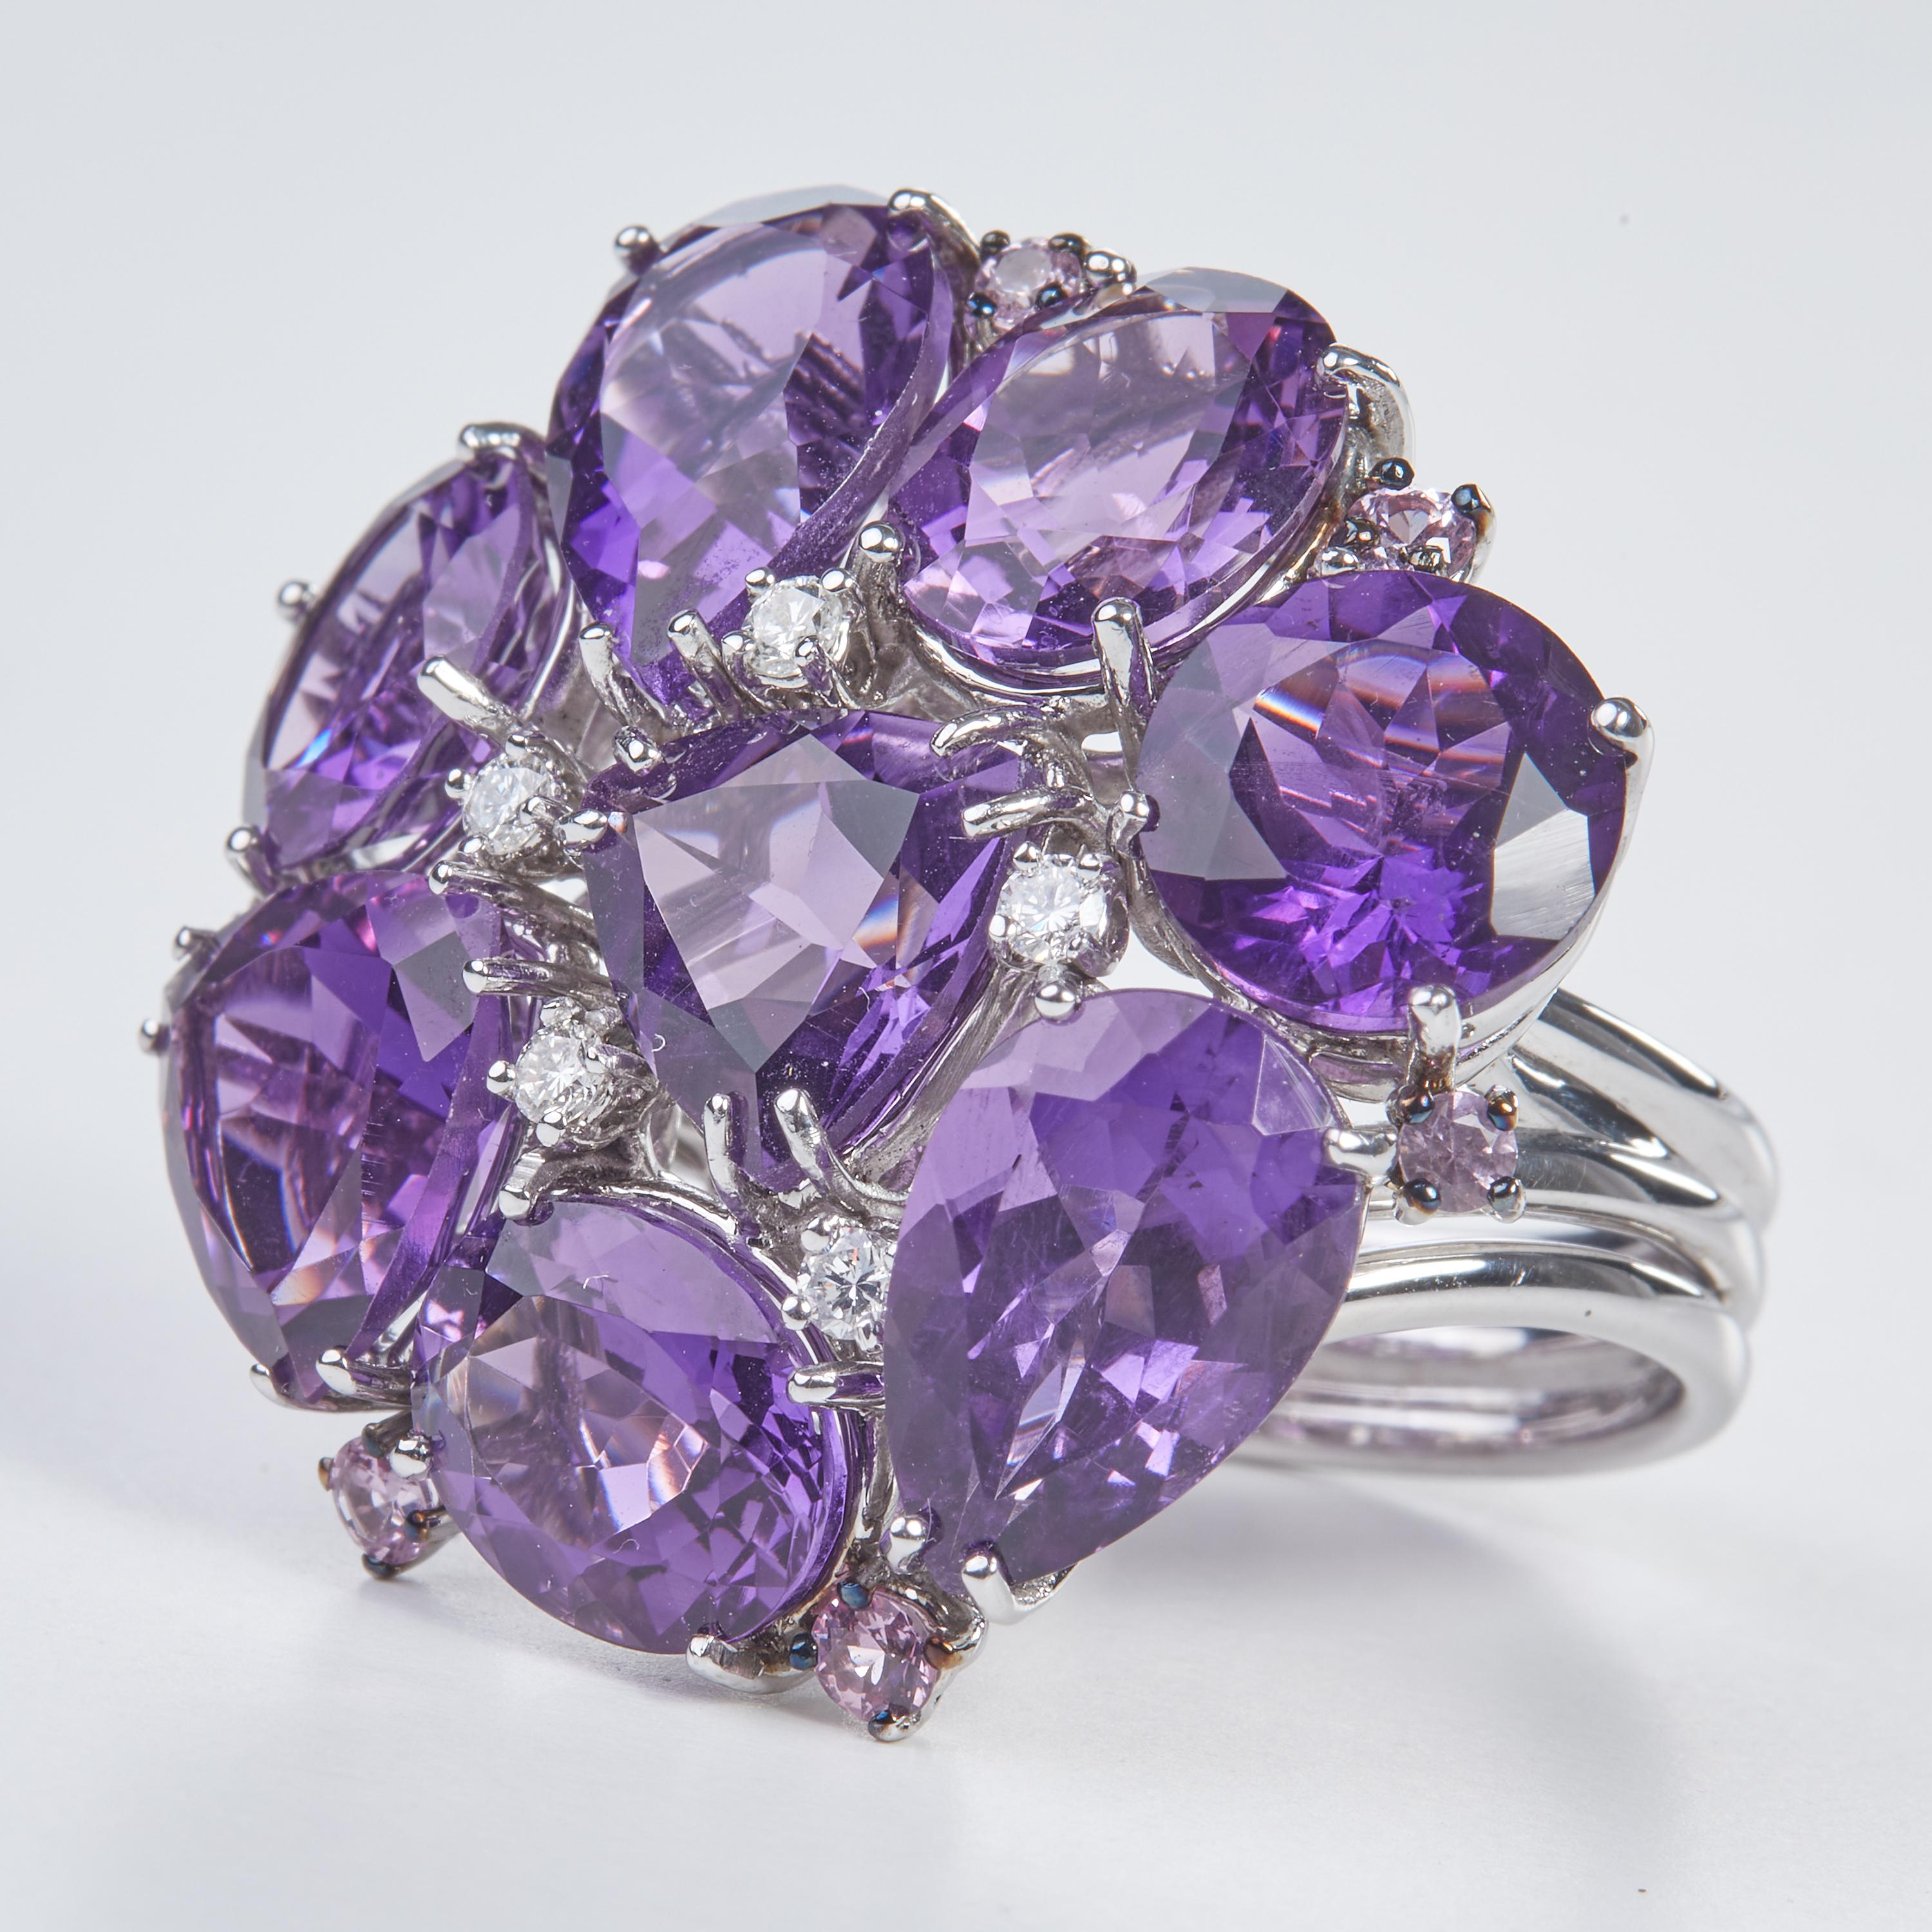 18 Karat WG Diamond and Amethyst Coktail Ring
5  Diamonds 0,18 Carat
8 Amethist  19.47 Carat
7 Sap. pink 0.63 Carat

Founded in 1974, Gianni Lazzaro is a family-owned jewelery company based out of Düsseldorf, Germany.
Although rooted in Germany,